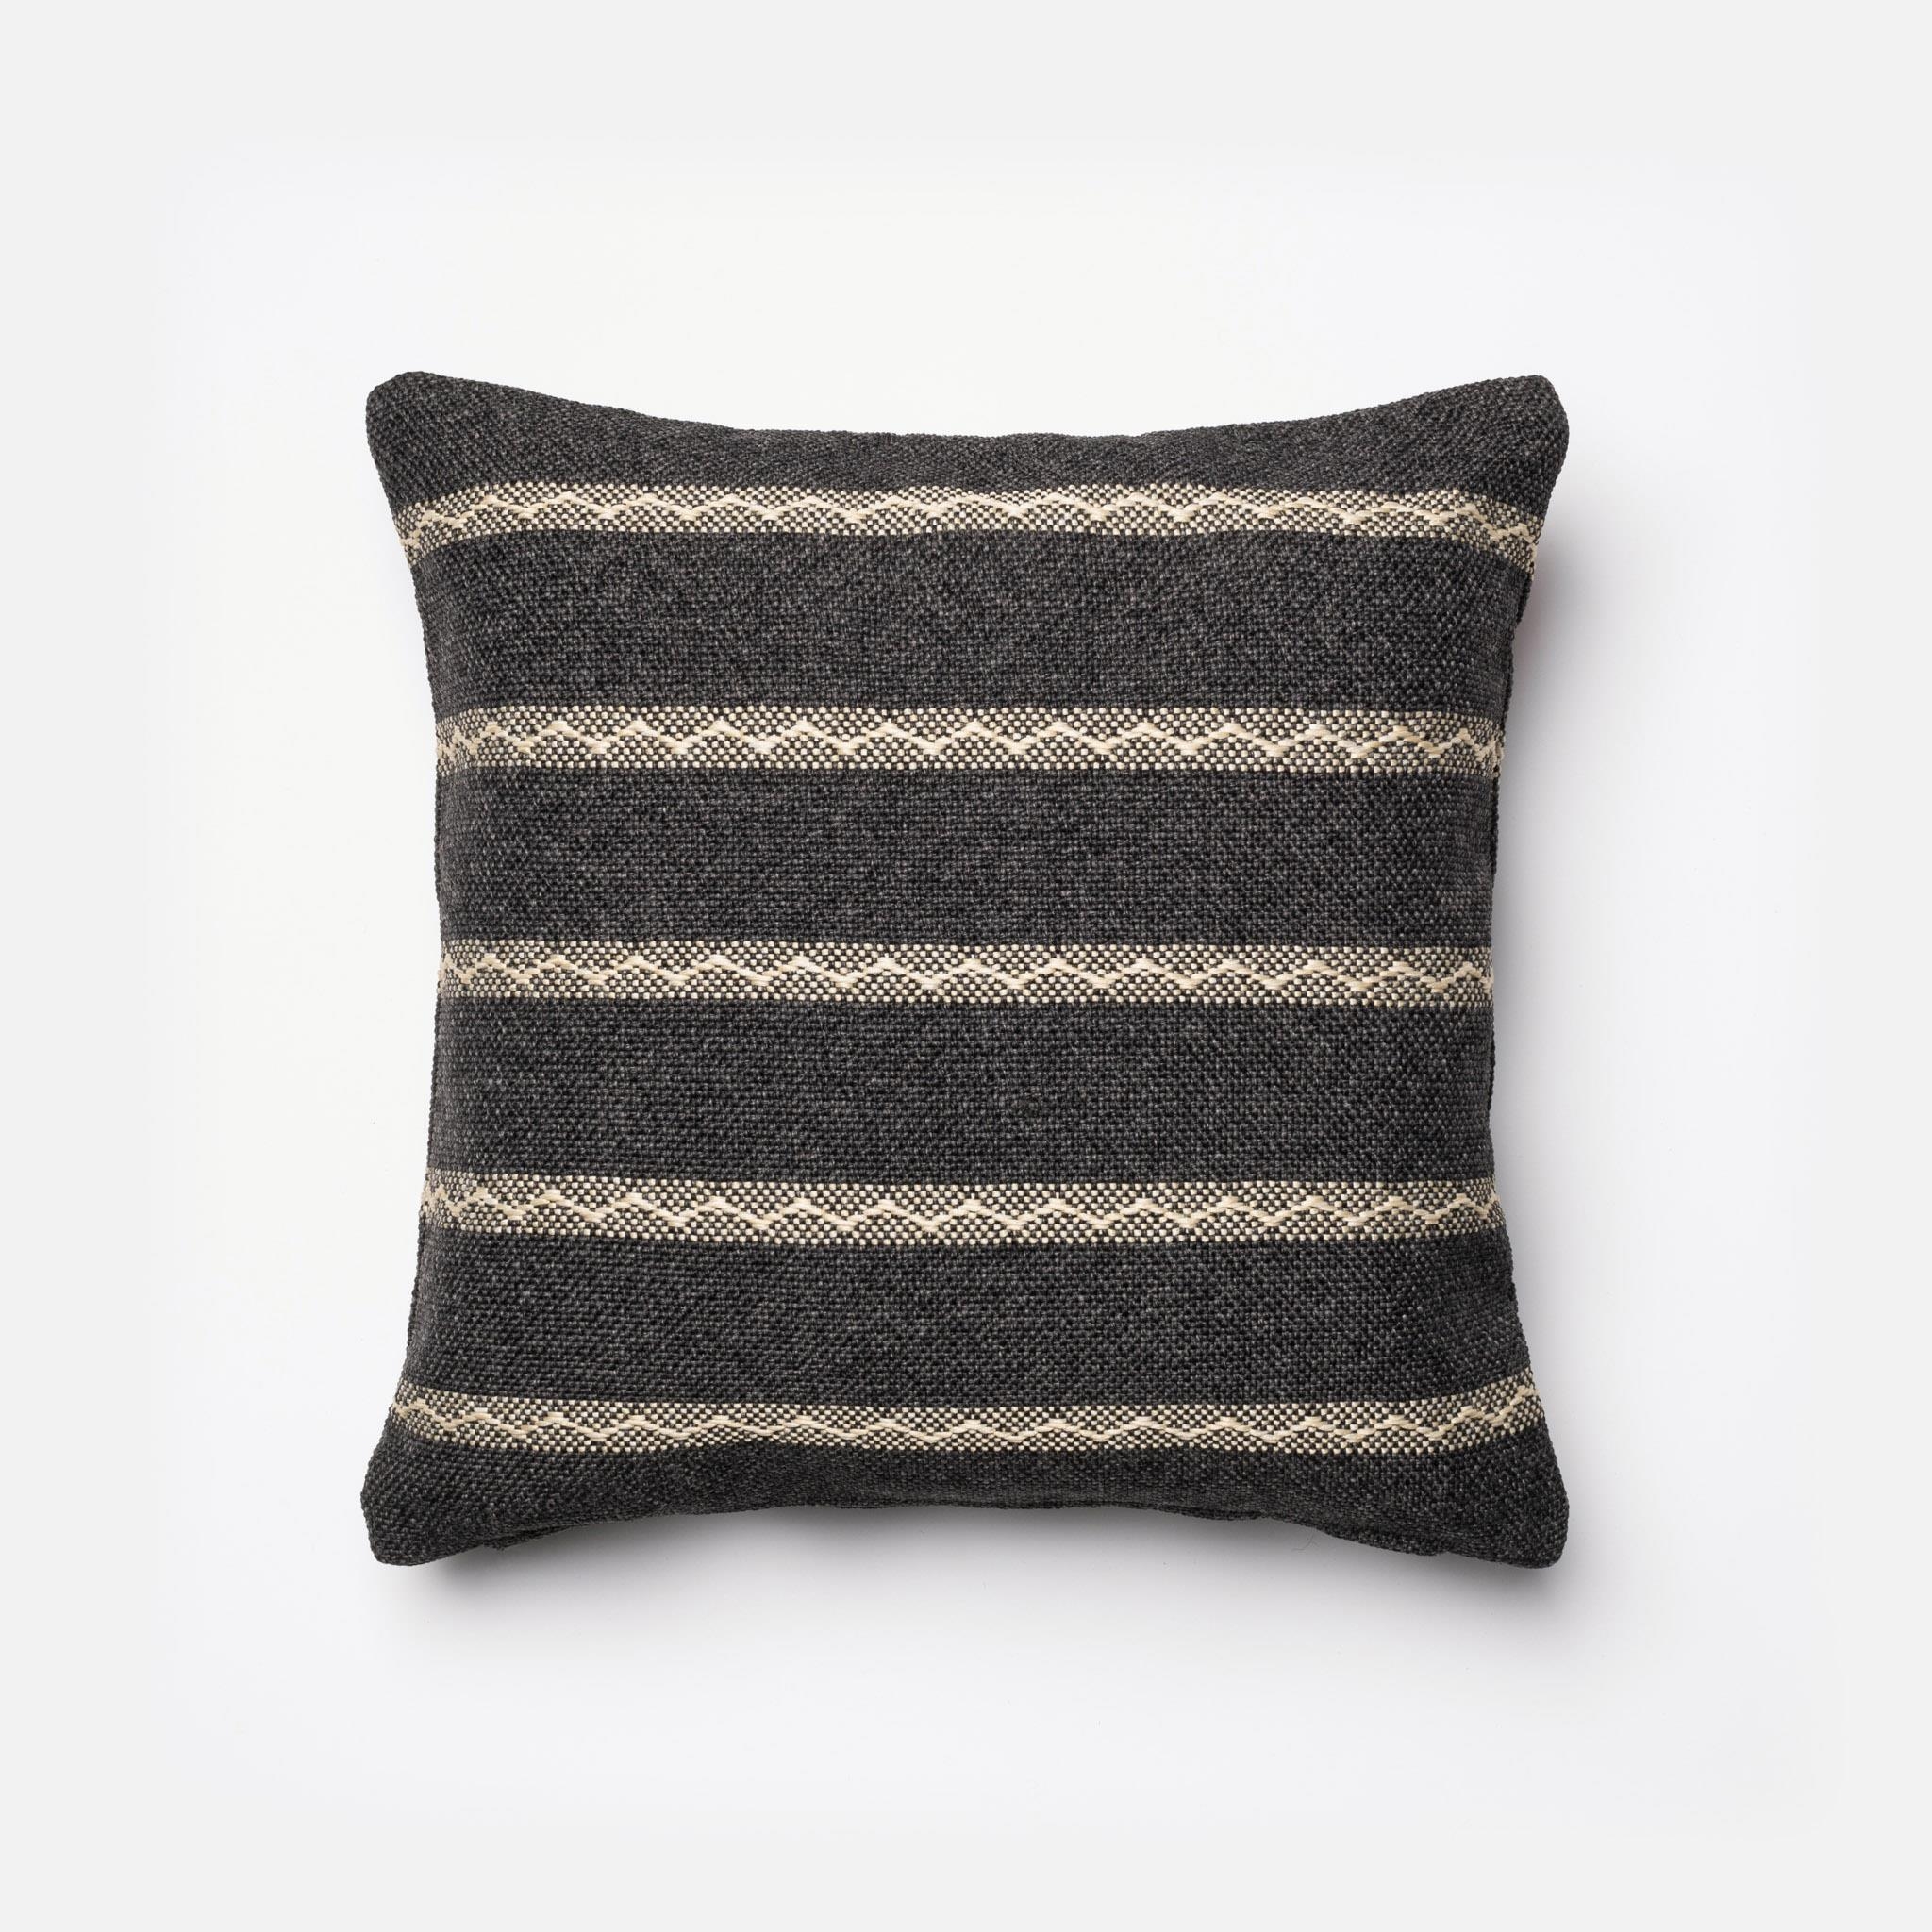 PILLOWS - CHARCOAL / BEIGE - 18" X 18" Cover Only - Image 0